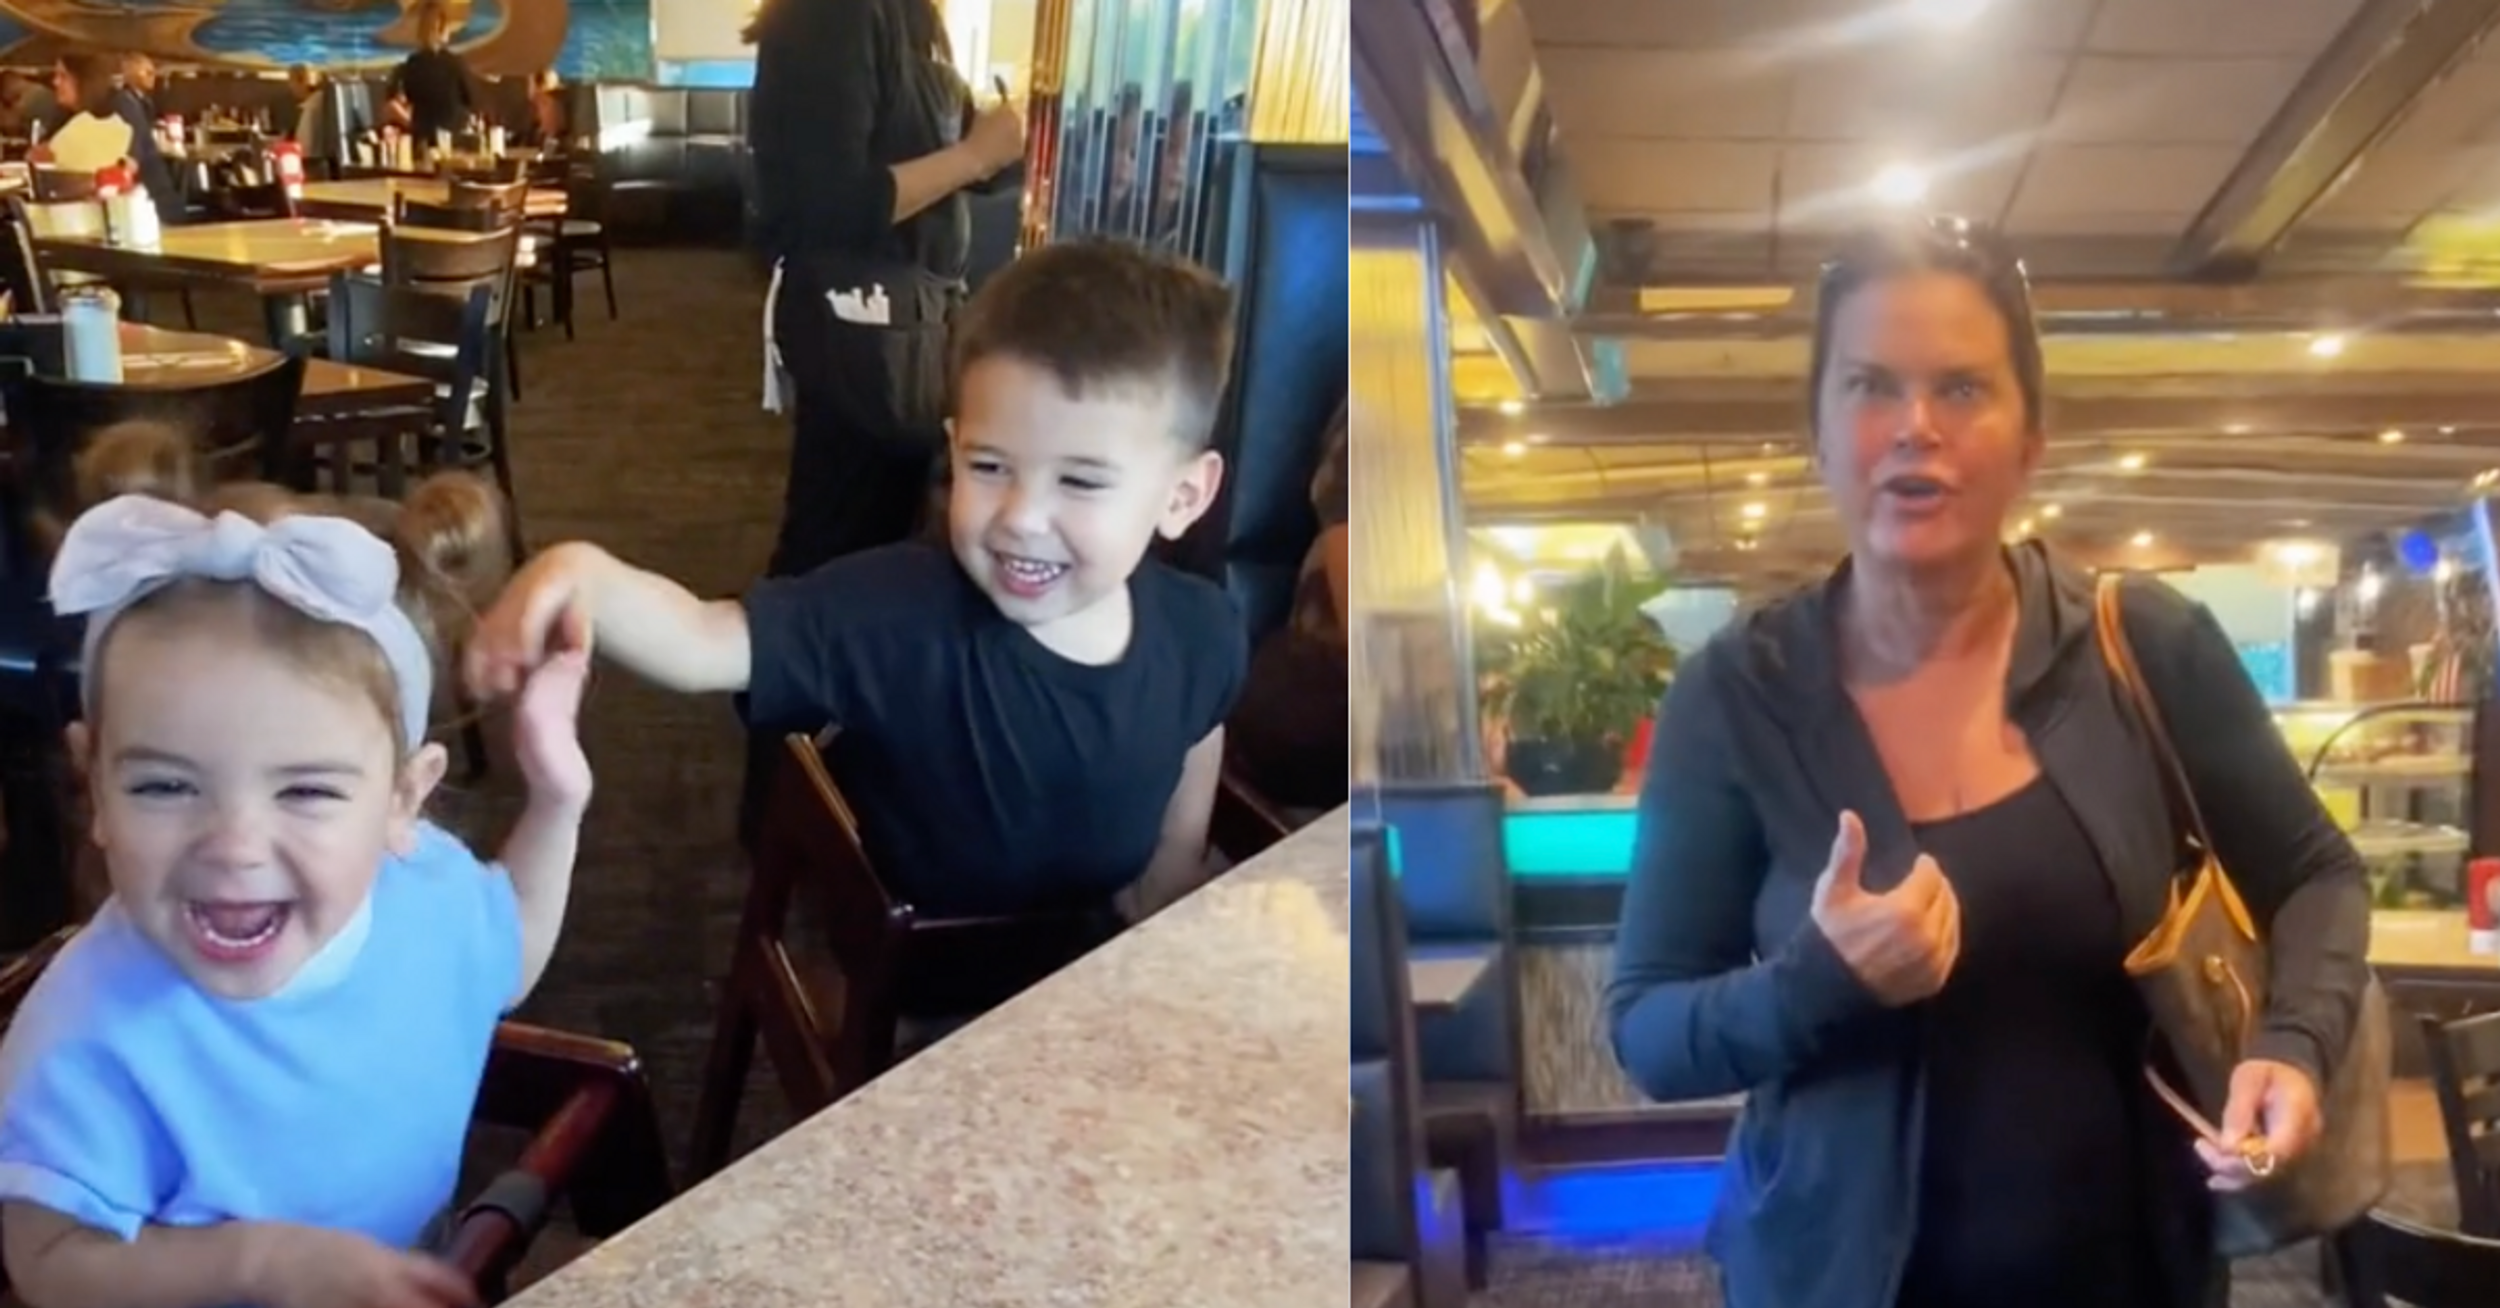 Woman Erupts At Mom For Allowing Young Kids To Talk And Laugh At Long Island Restaurant